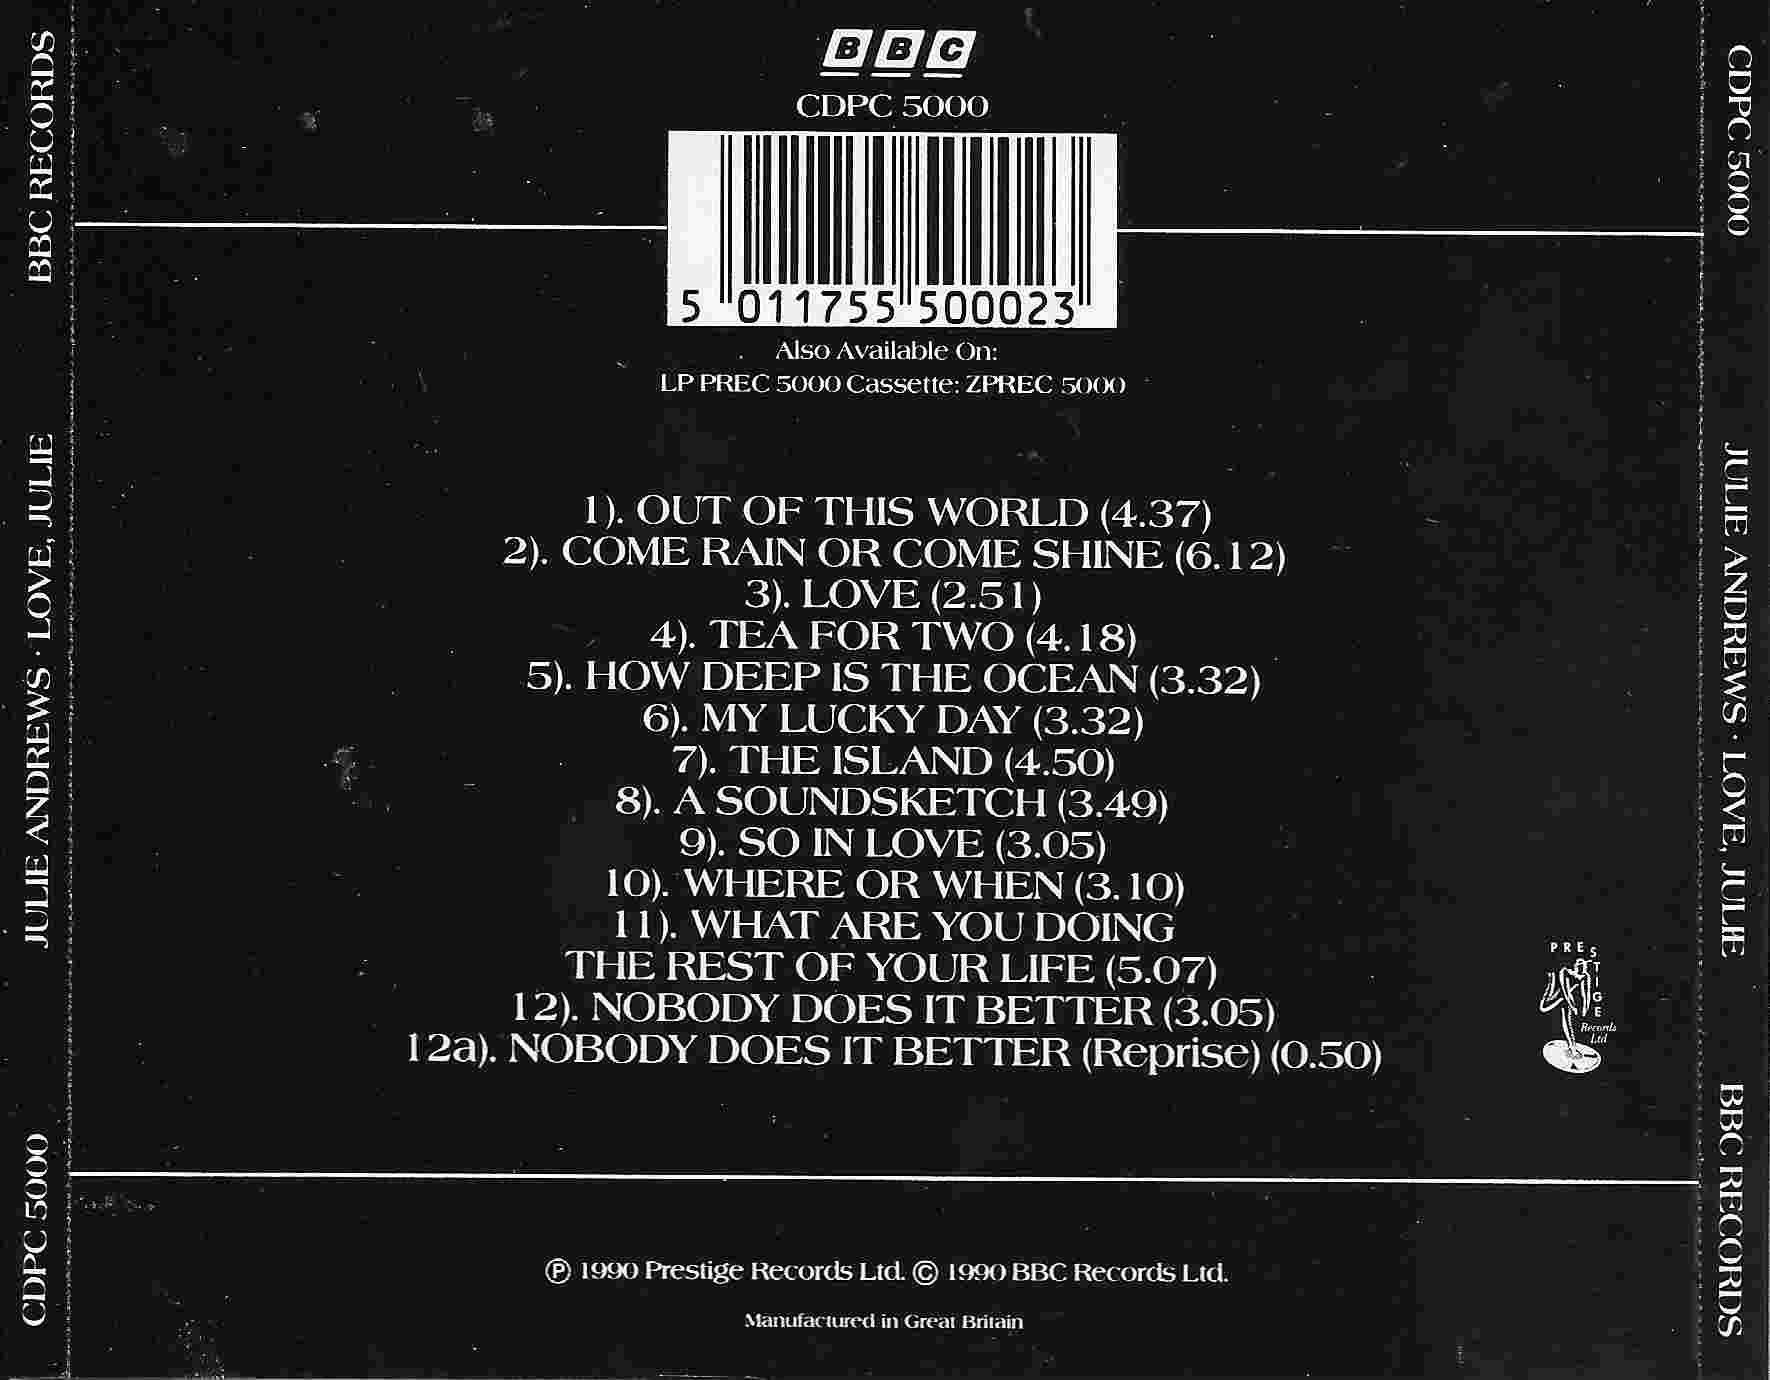 Back cover of CDPC 5000